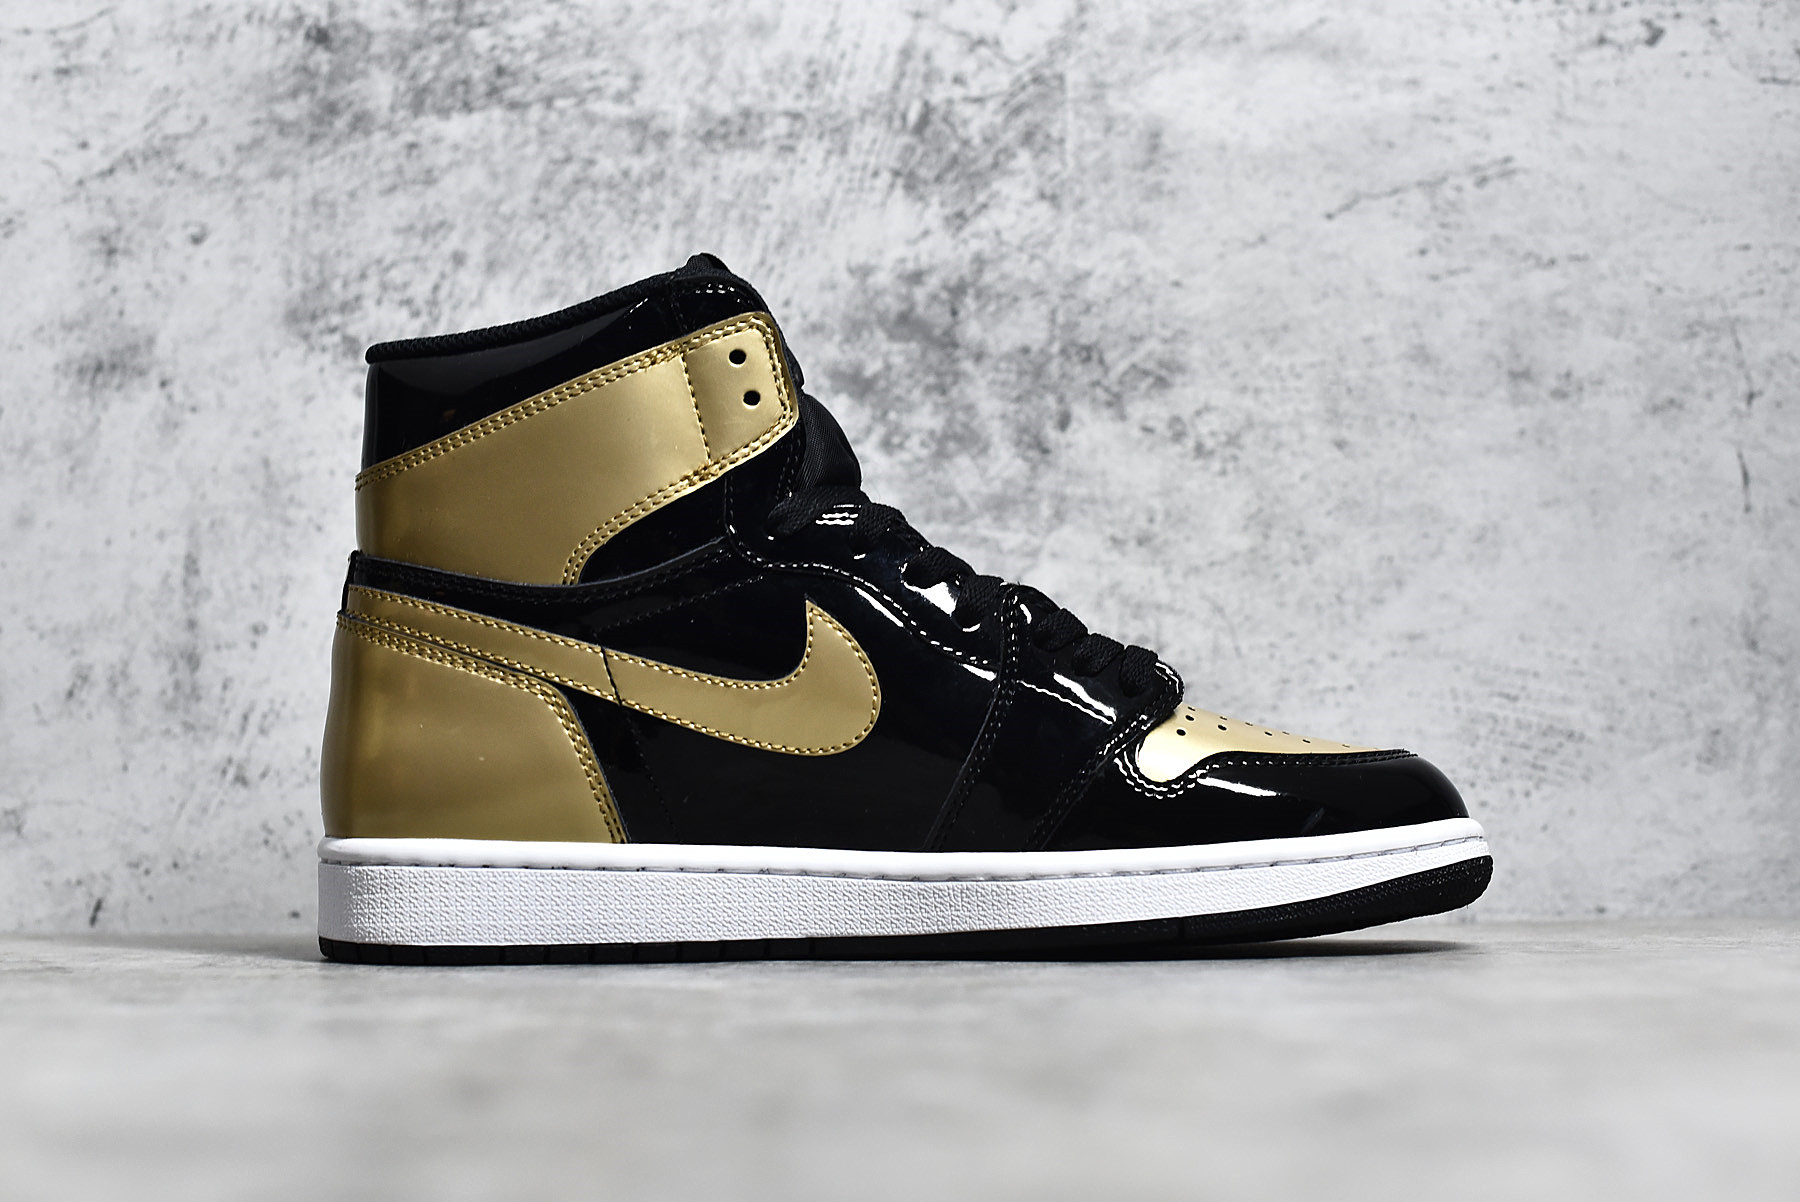 Authentic Air Jordan 1 Gold Toe One of One